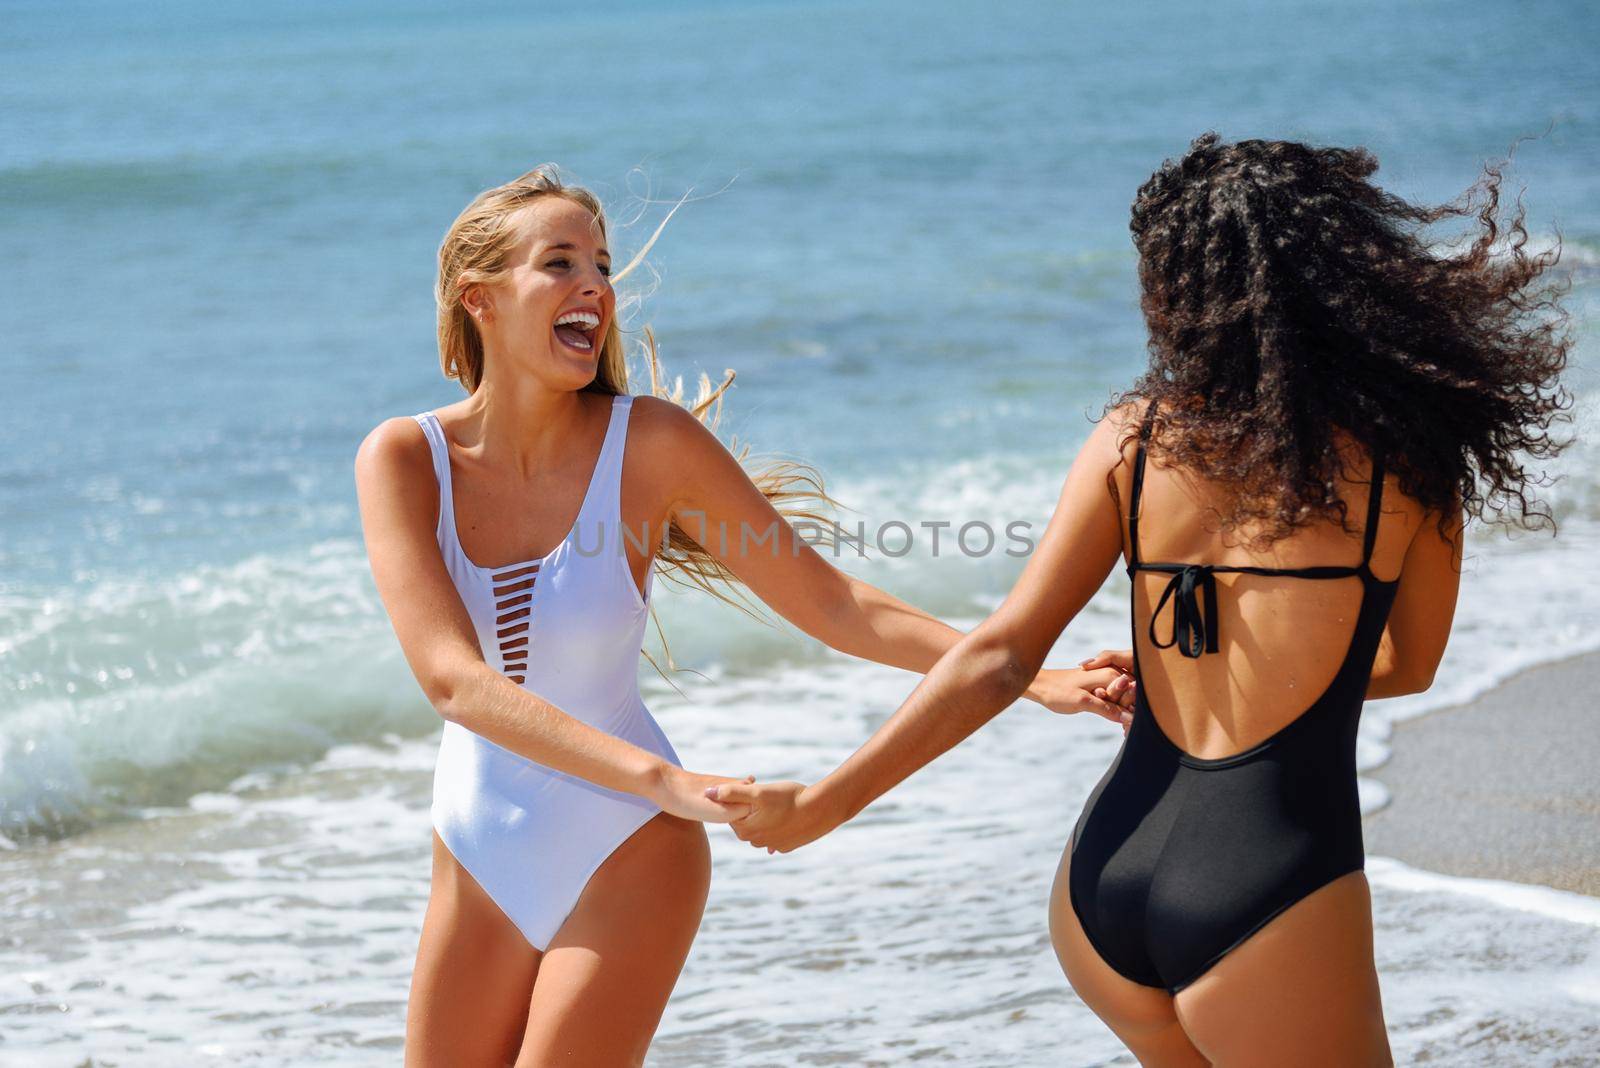 Two young women with beautiful bodies in swimwear having fun with their hands caught on the beach. Funny caucasian and arabic females wearing black and white swimsuits